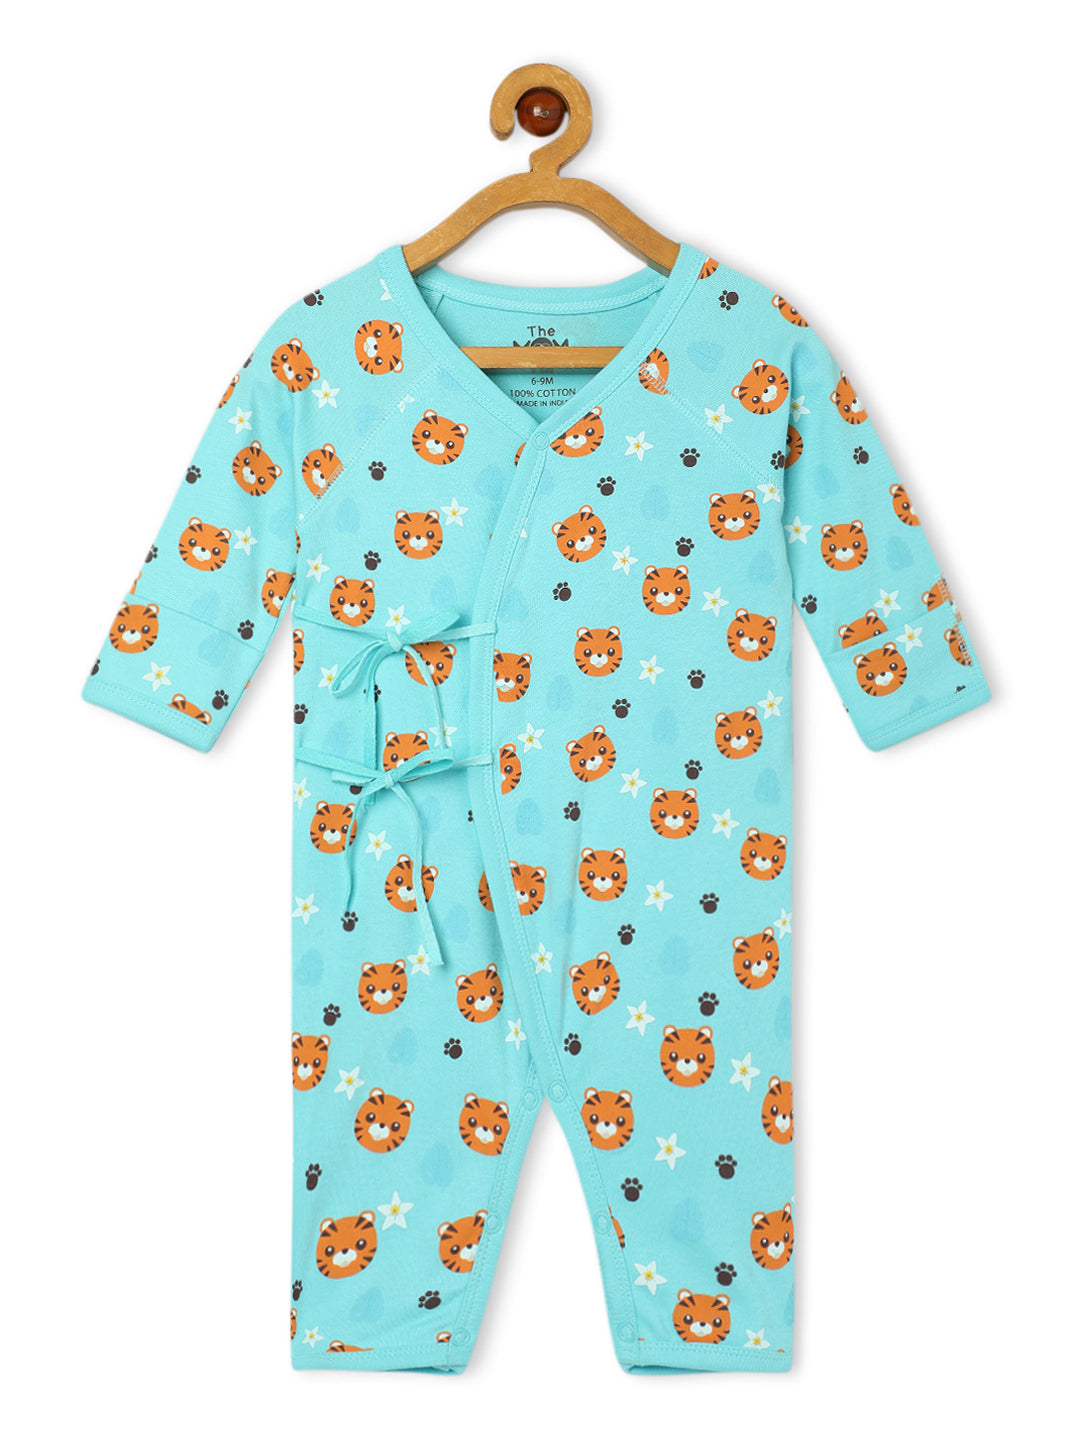 Jabla Infant Romper Combo Of 3: Feline Fighters-Staying Pawsitive-Get On My Level